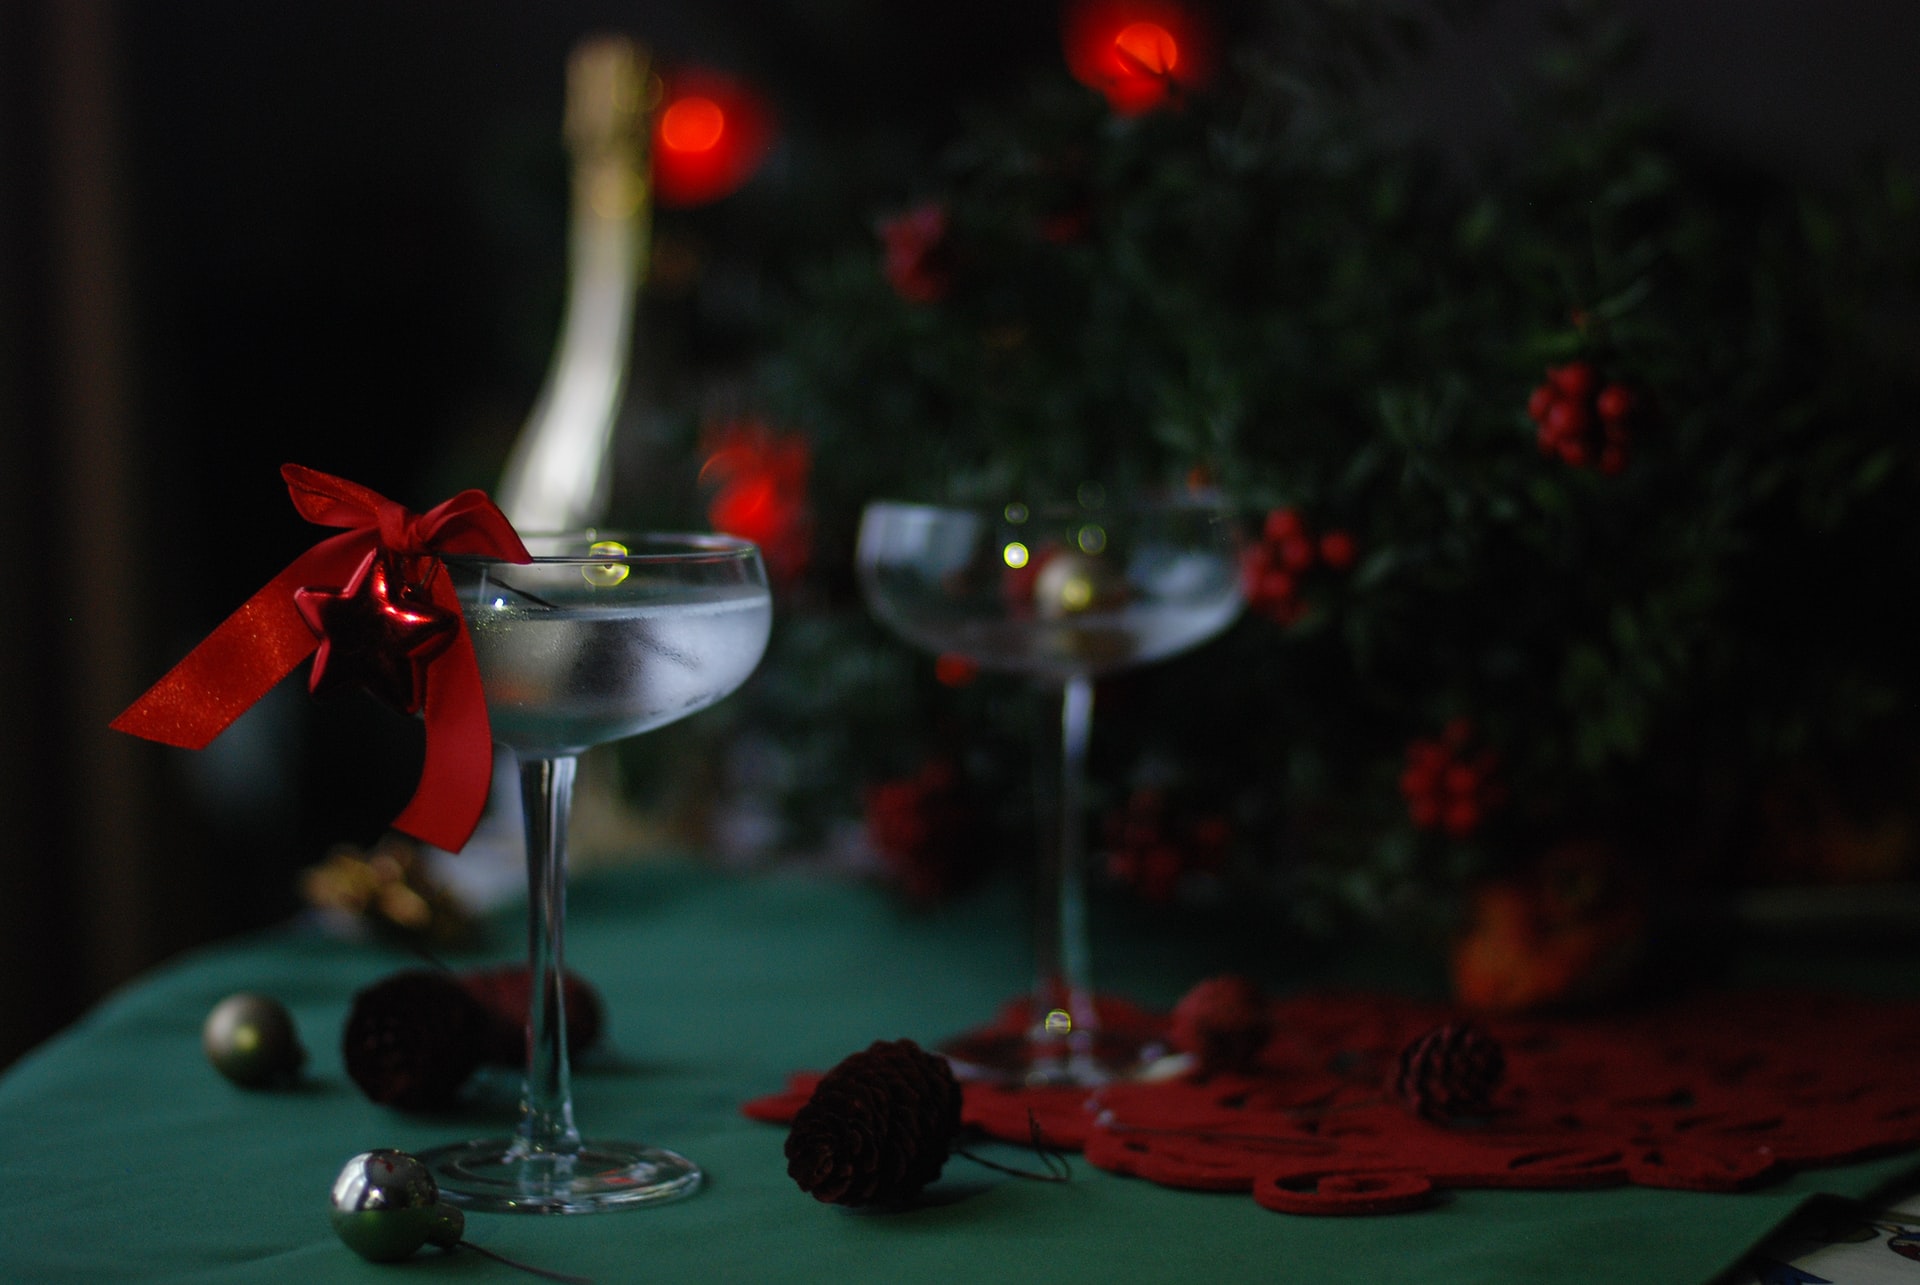 Two martinis sit in front of a Christmas tree with red ornaments.